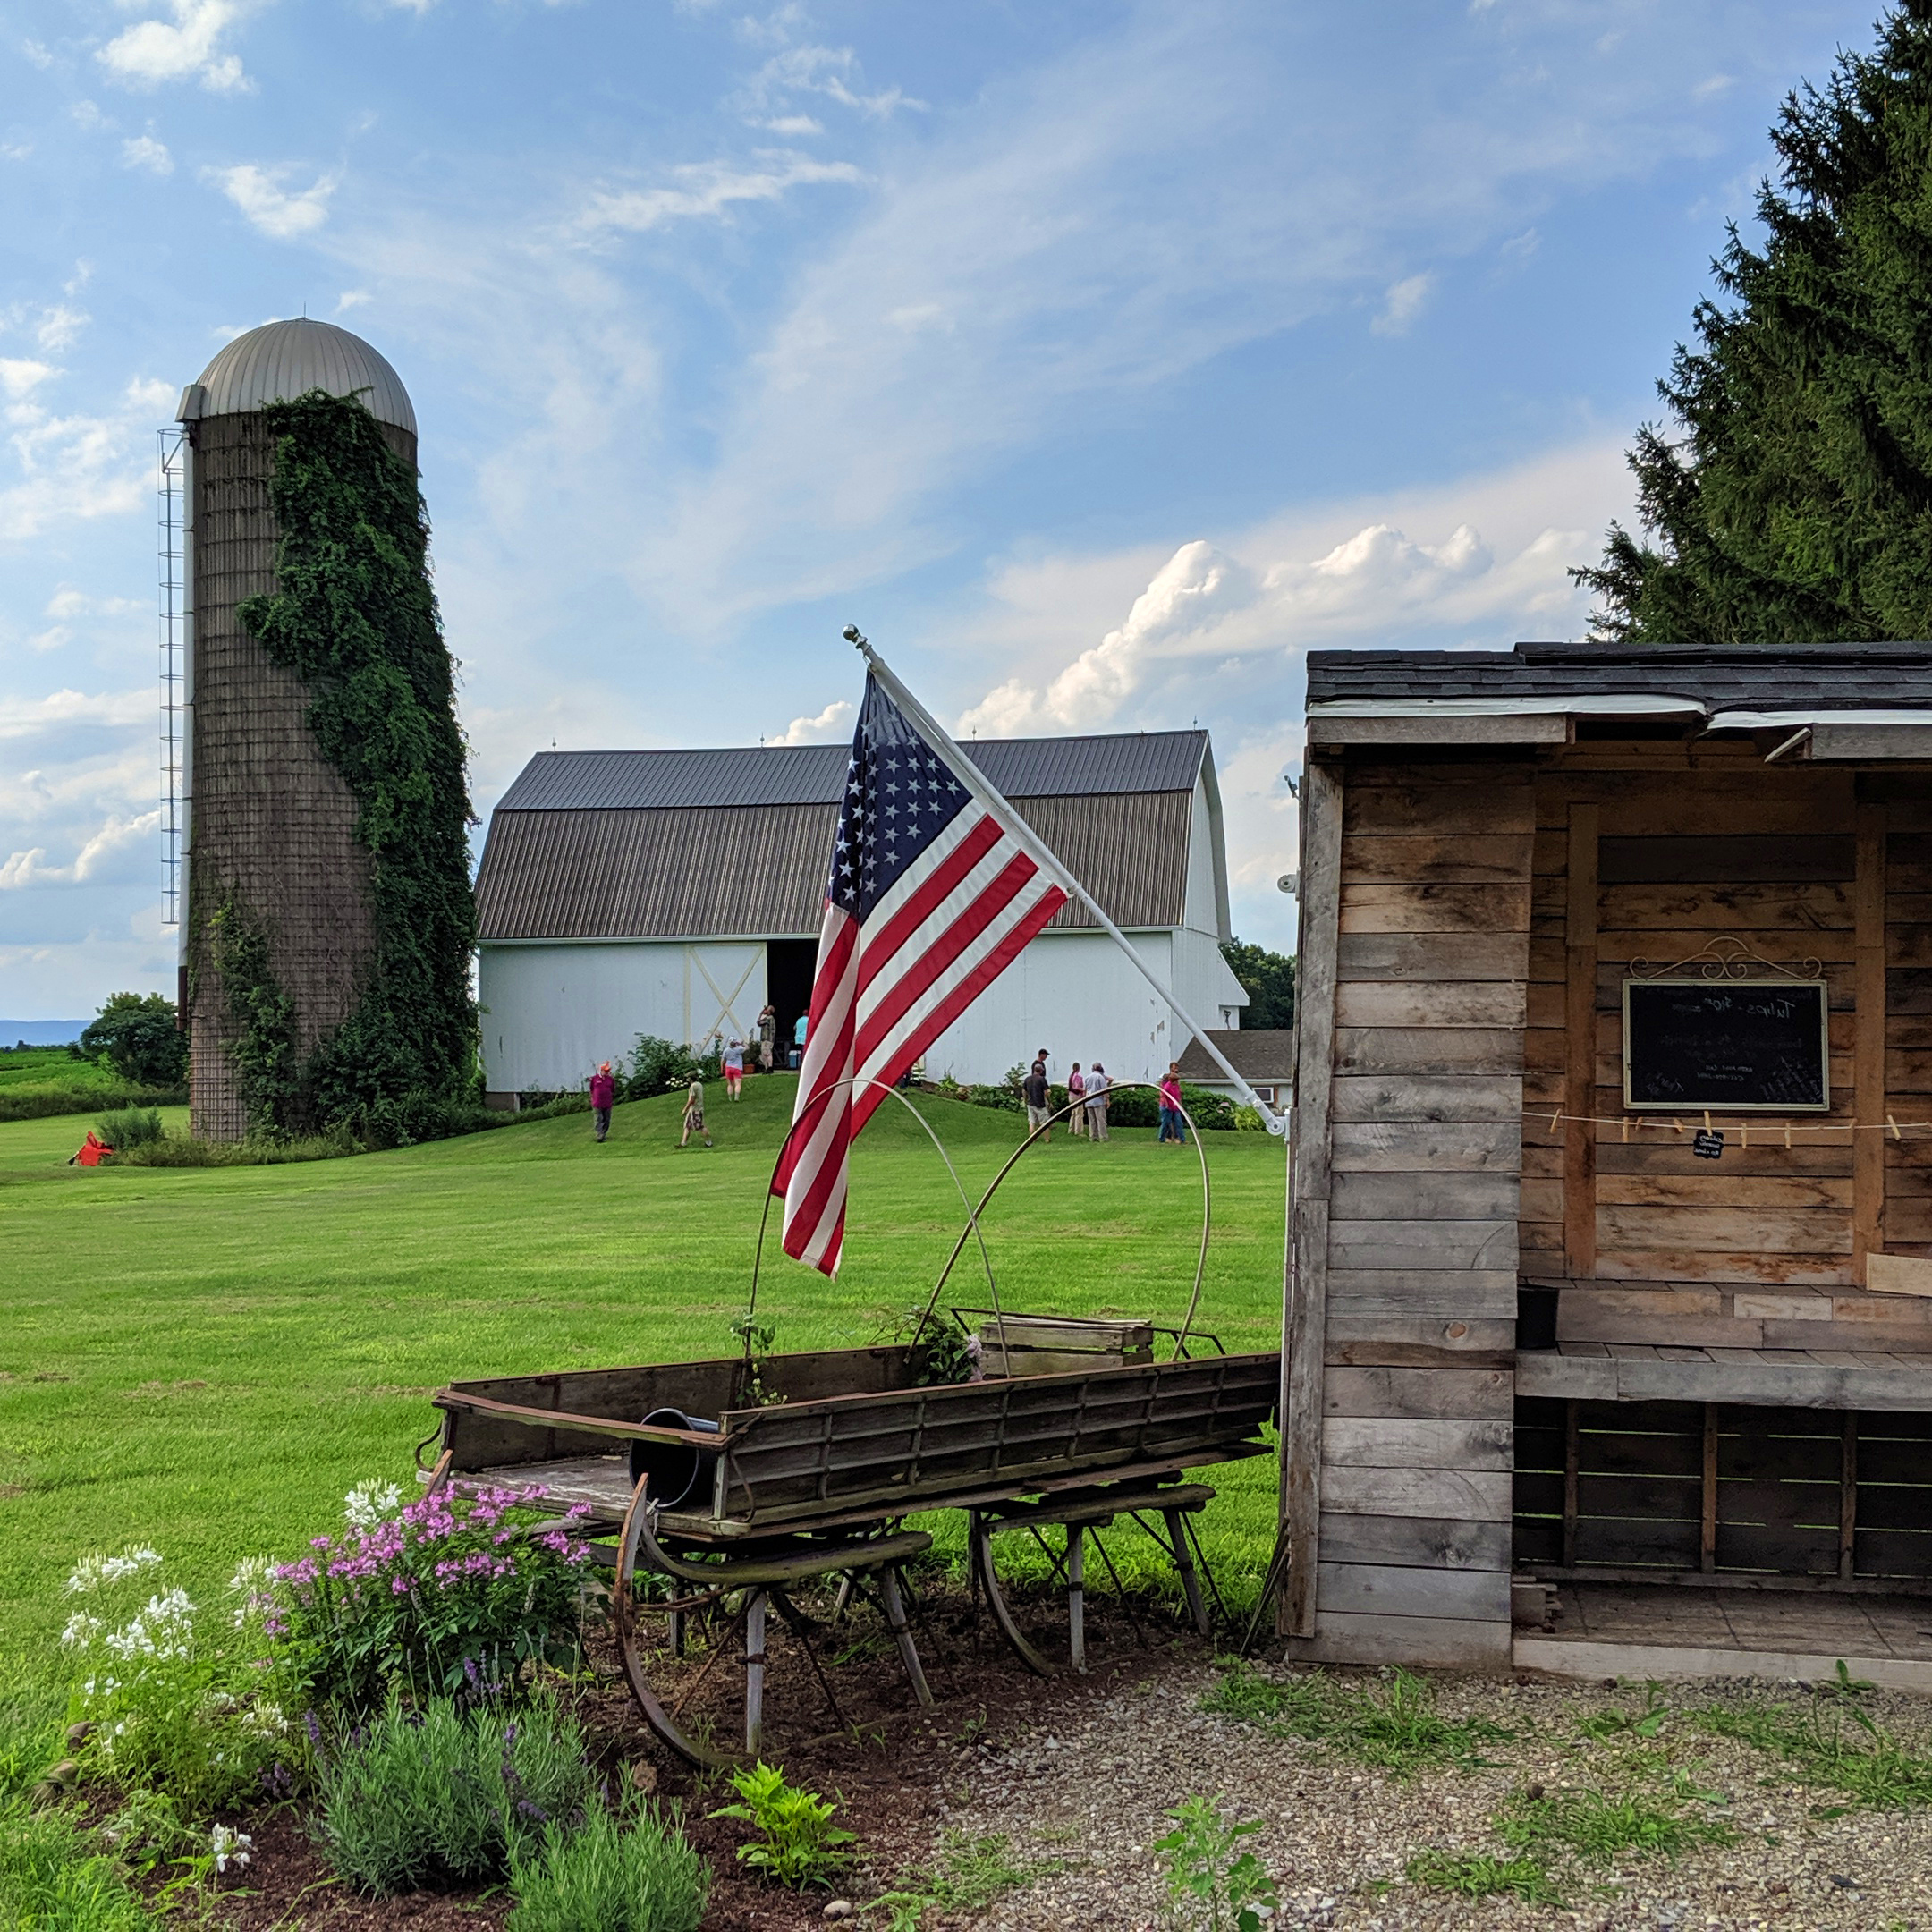 An American flag flies at a farm stand in New York